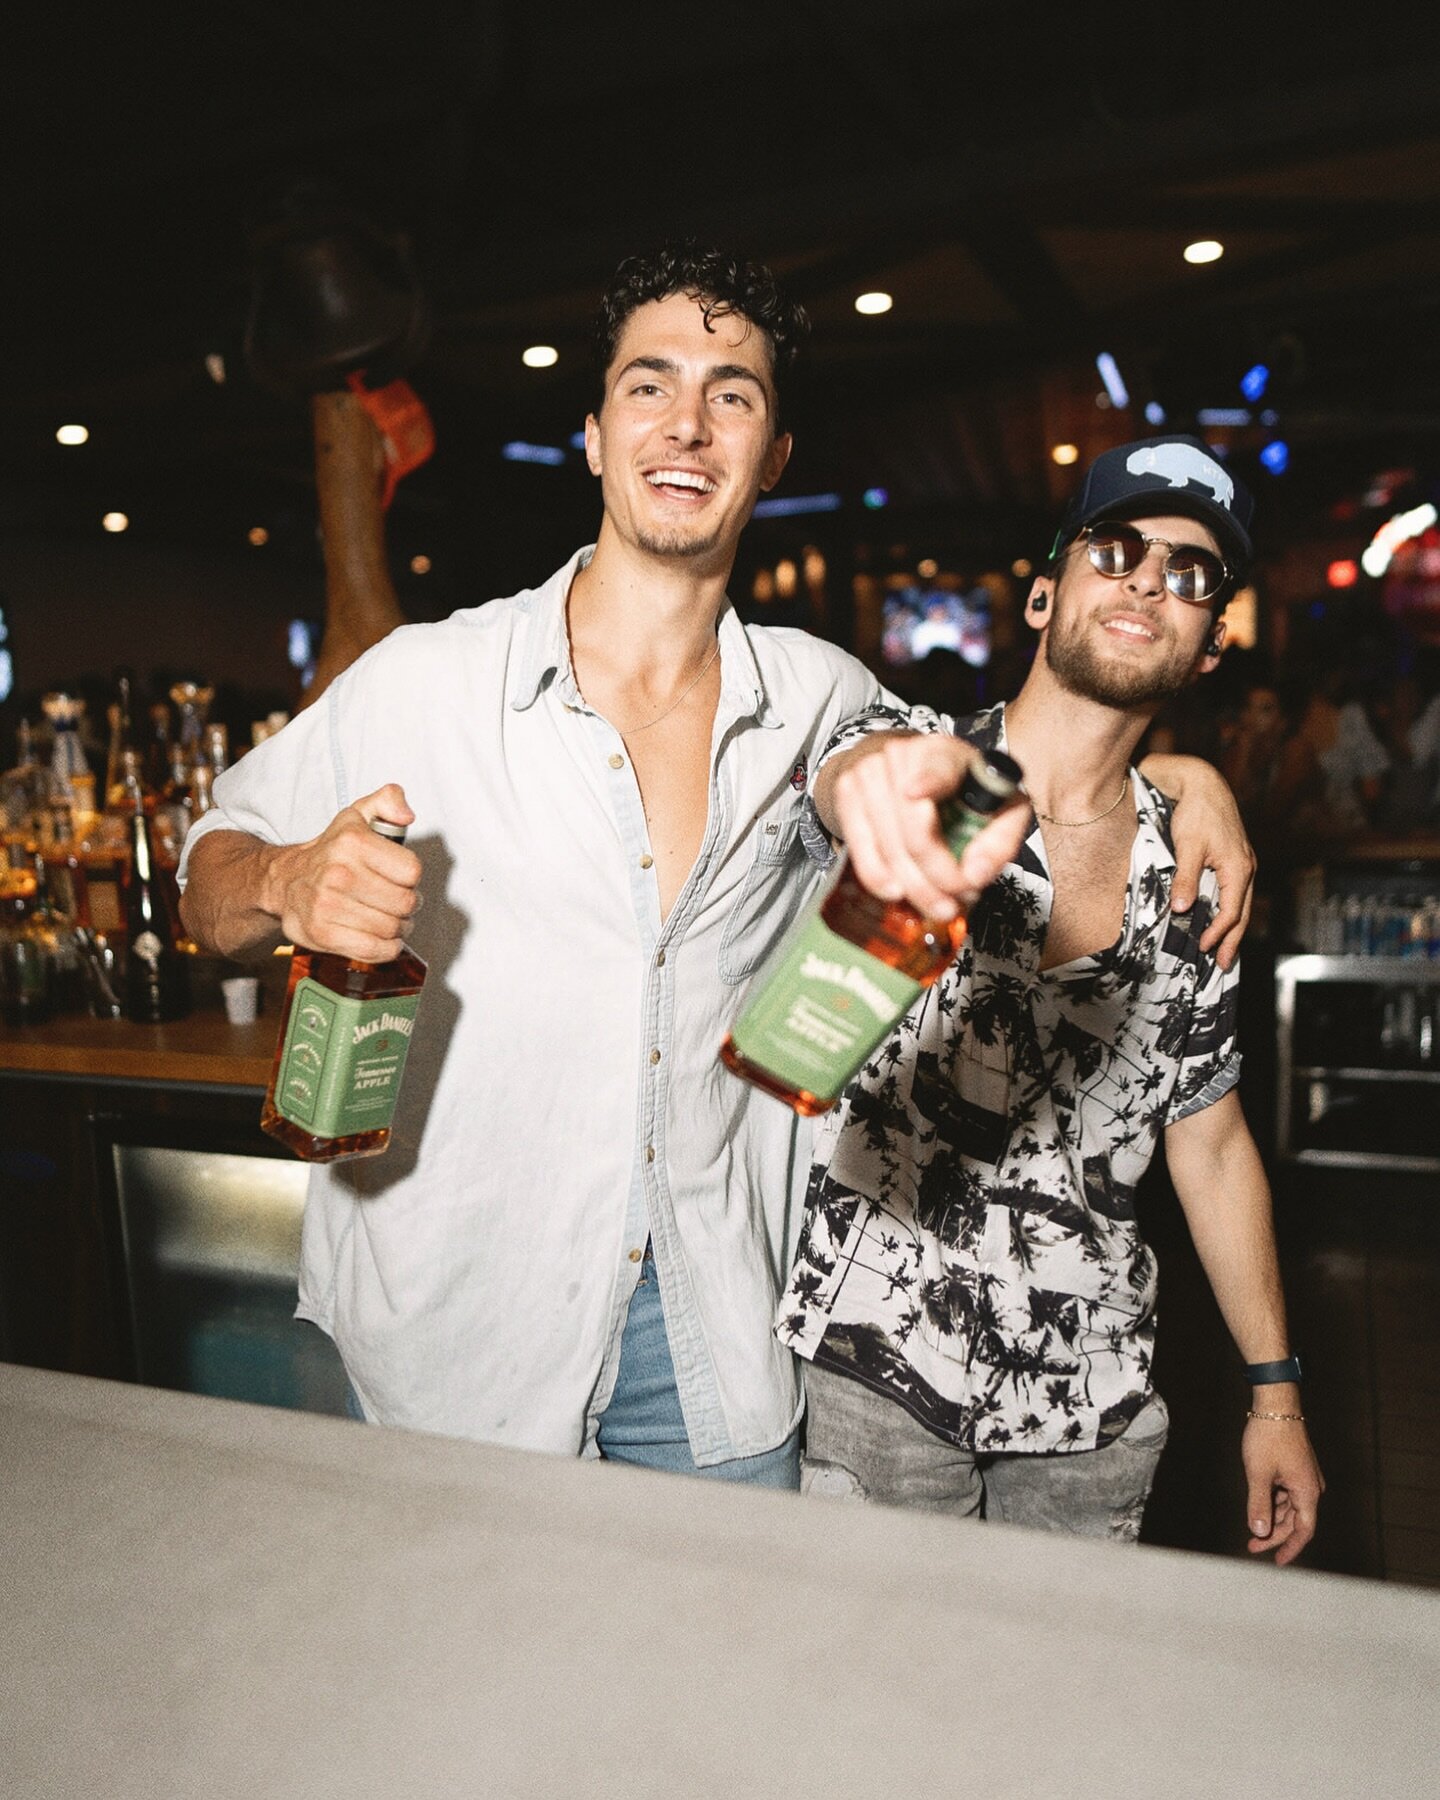 That Friday feeling&rsquo; is here

We&rsquo;re ready to have a good time with y&rsquo;all. Doors open and beer is cold! Music from @davehinrich and @official_rdna tonight to keep the party goin all night long